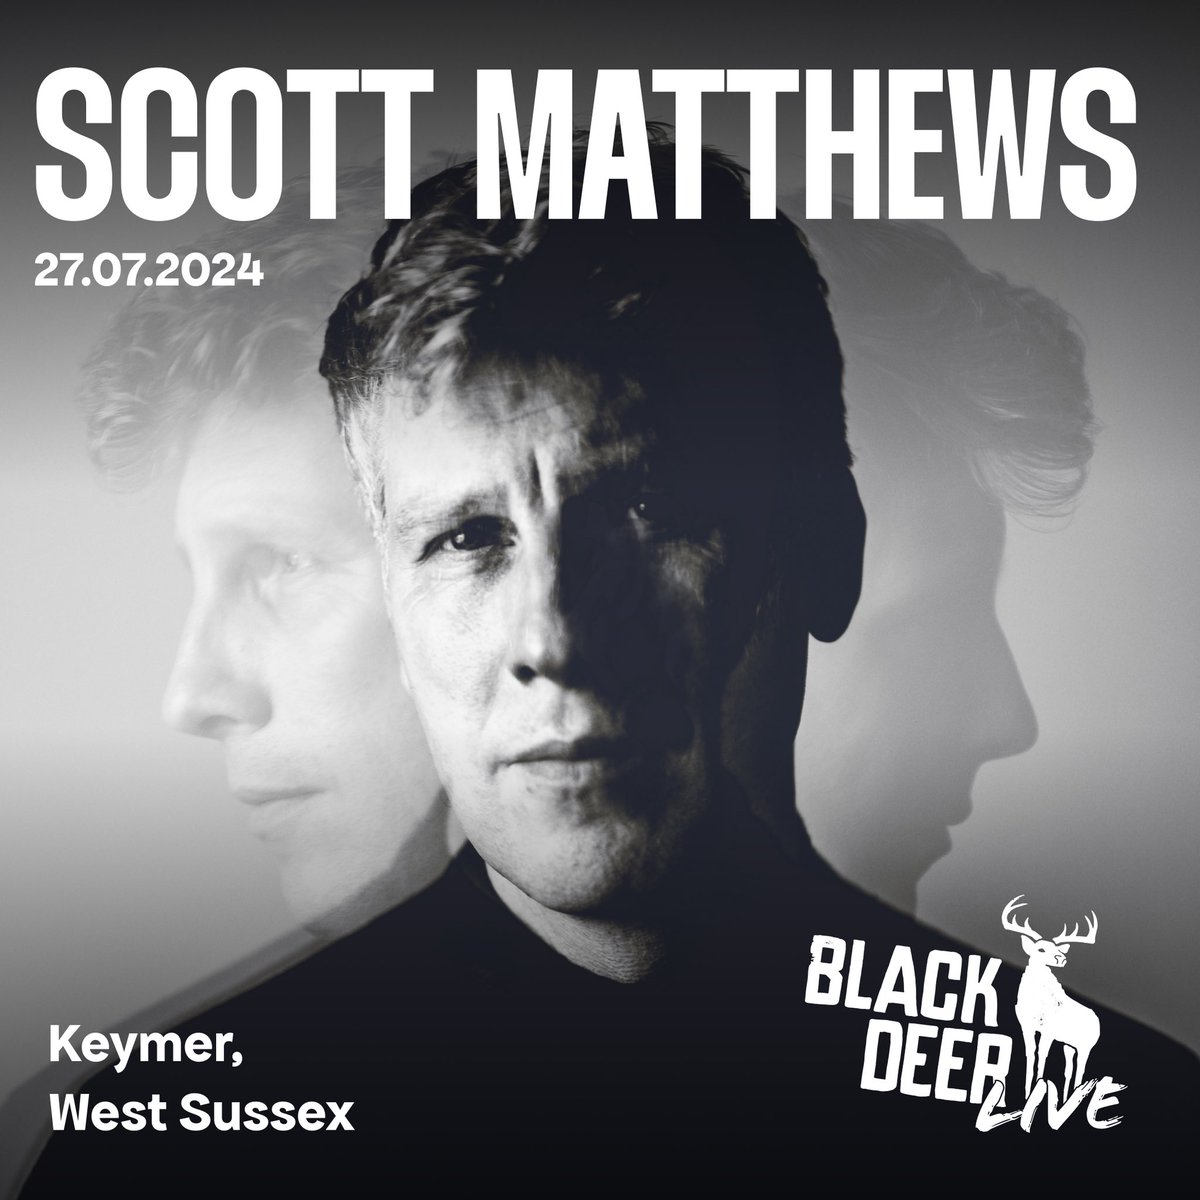 I'm excited to announce that I'll be performing the very first Black Deer Live show at the majestic St Cosmas & St Damian Church in West Sussex on 27th July 2024. It’s going to be a joy. Tickets for the event are available here: 
blackdeerlive.com/show/black-dee…

blackdeerlive.com/show/black-dee…